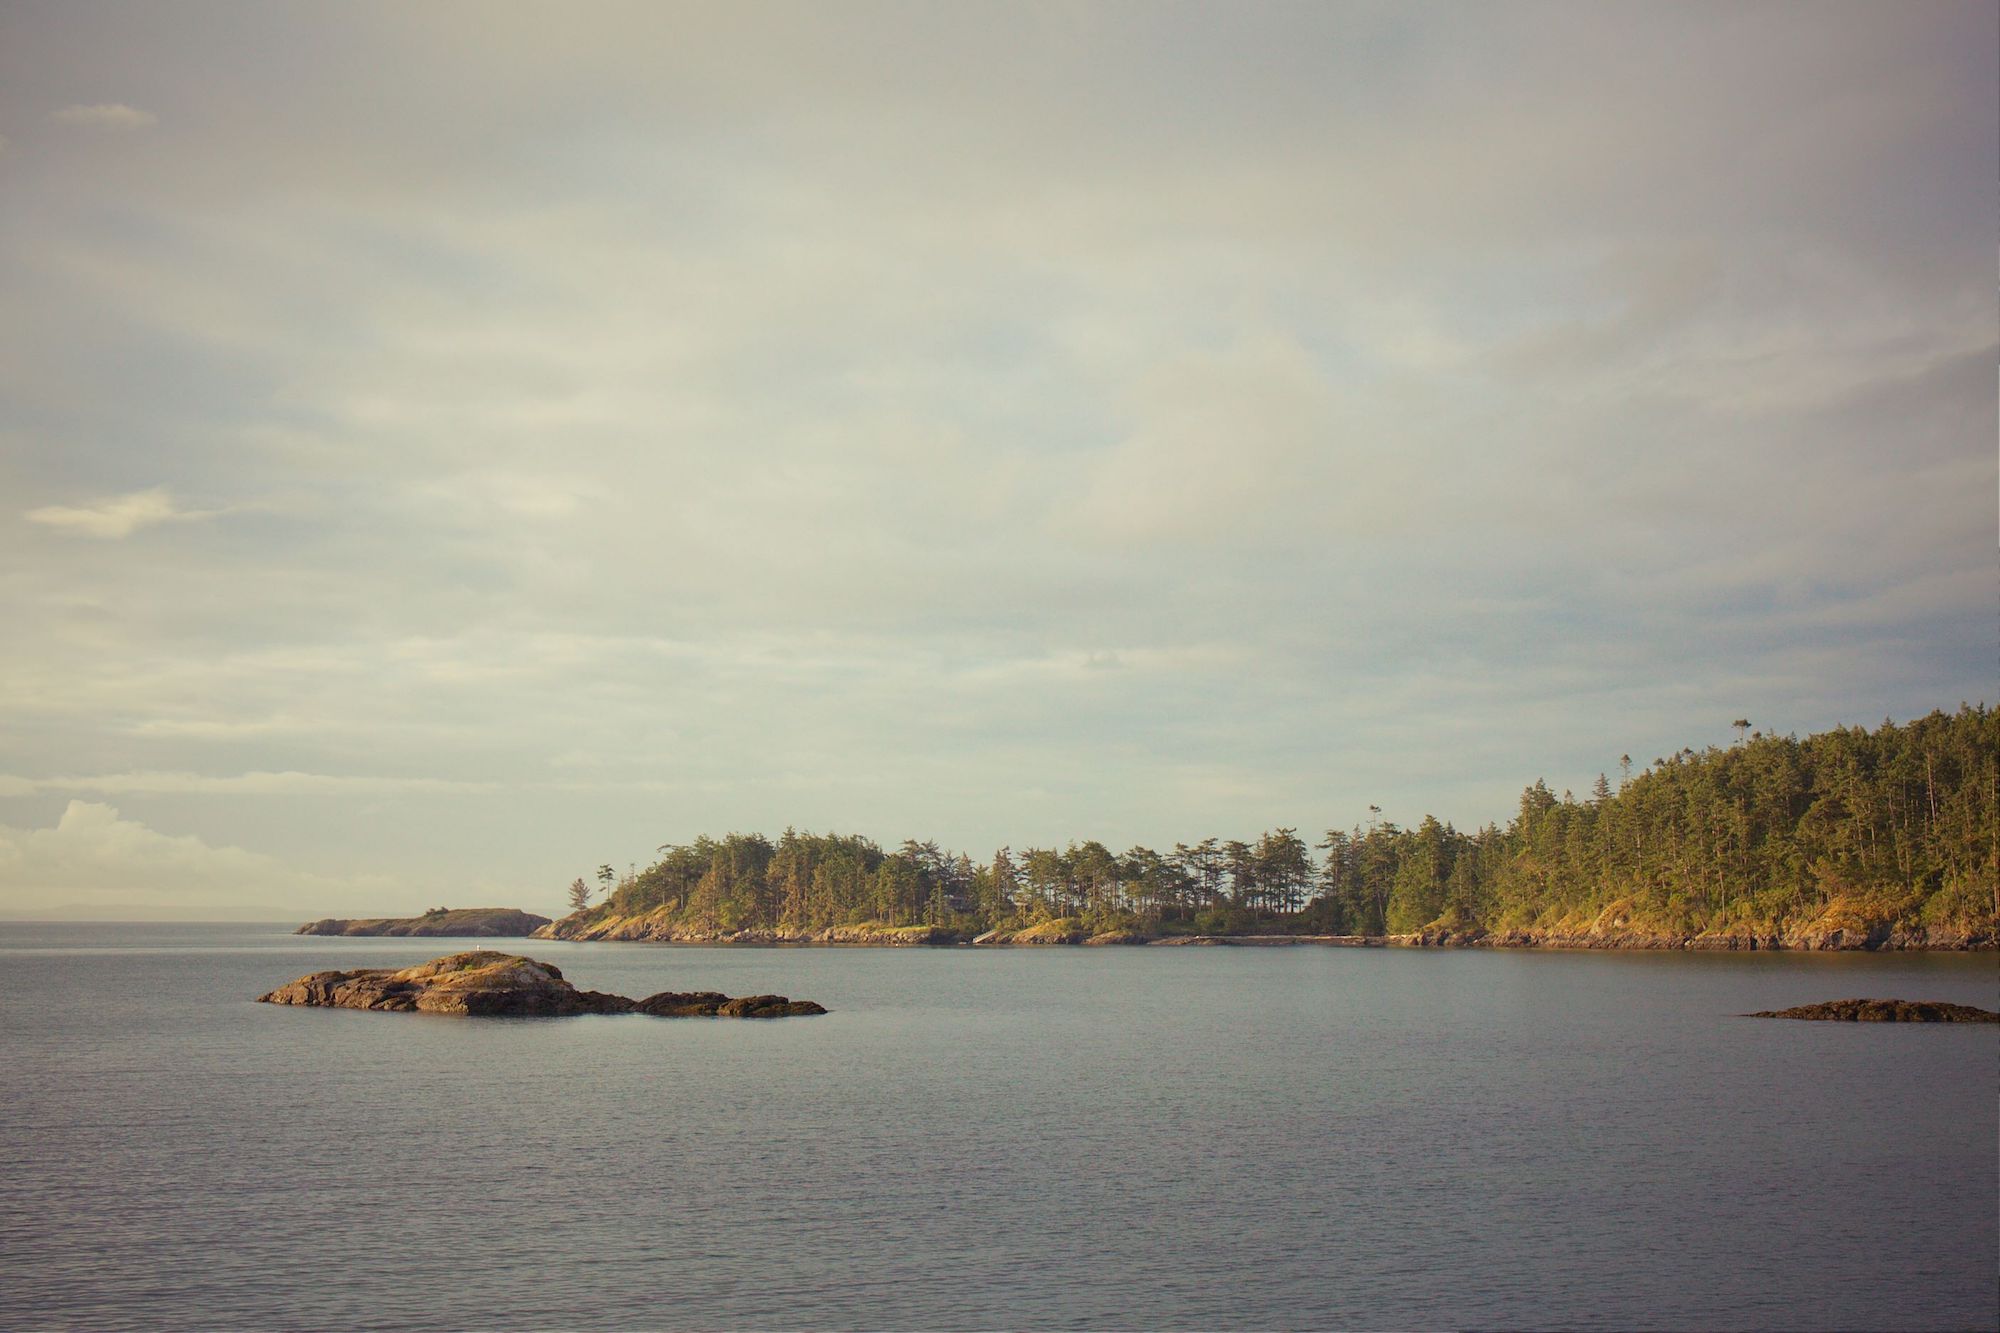 Landscape of Lopez Island and the water.